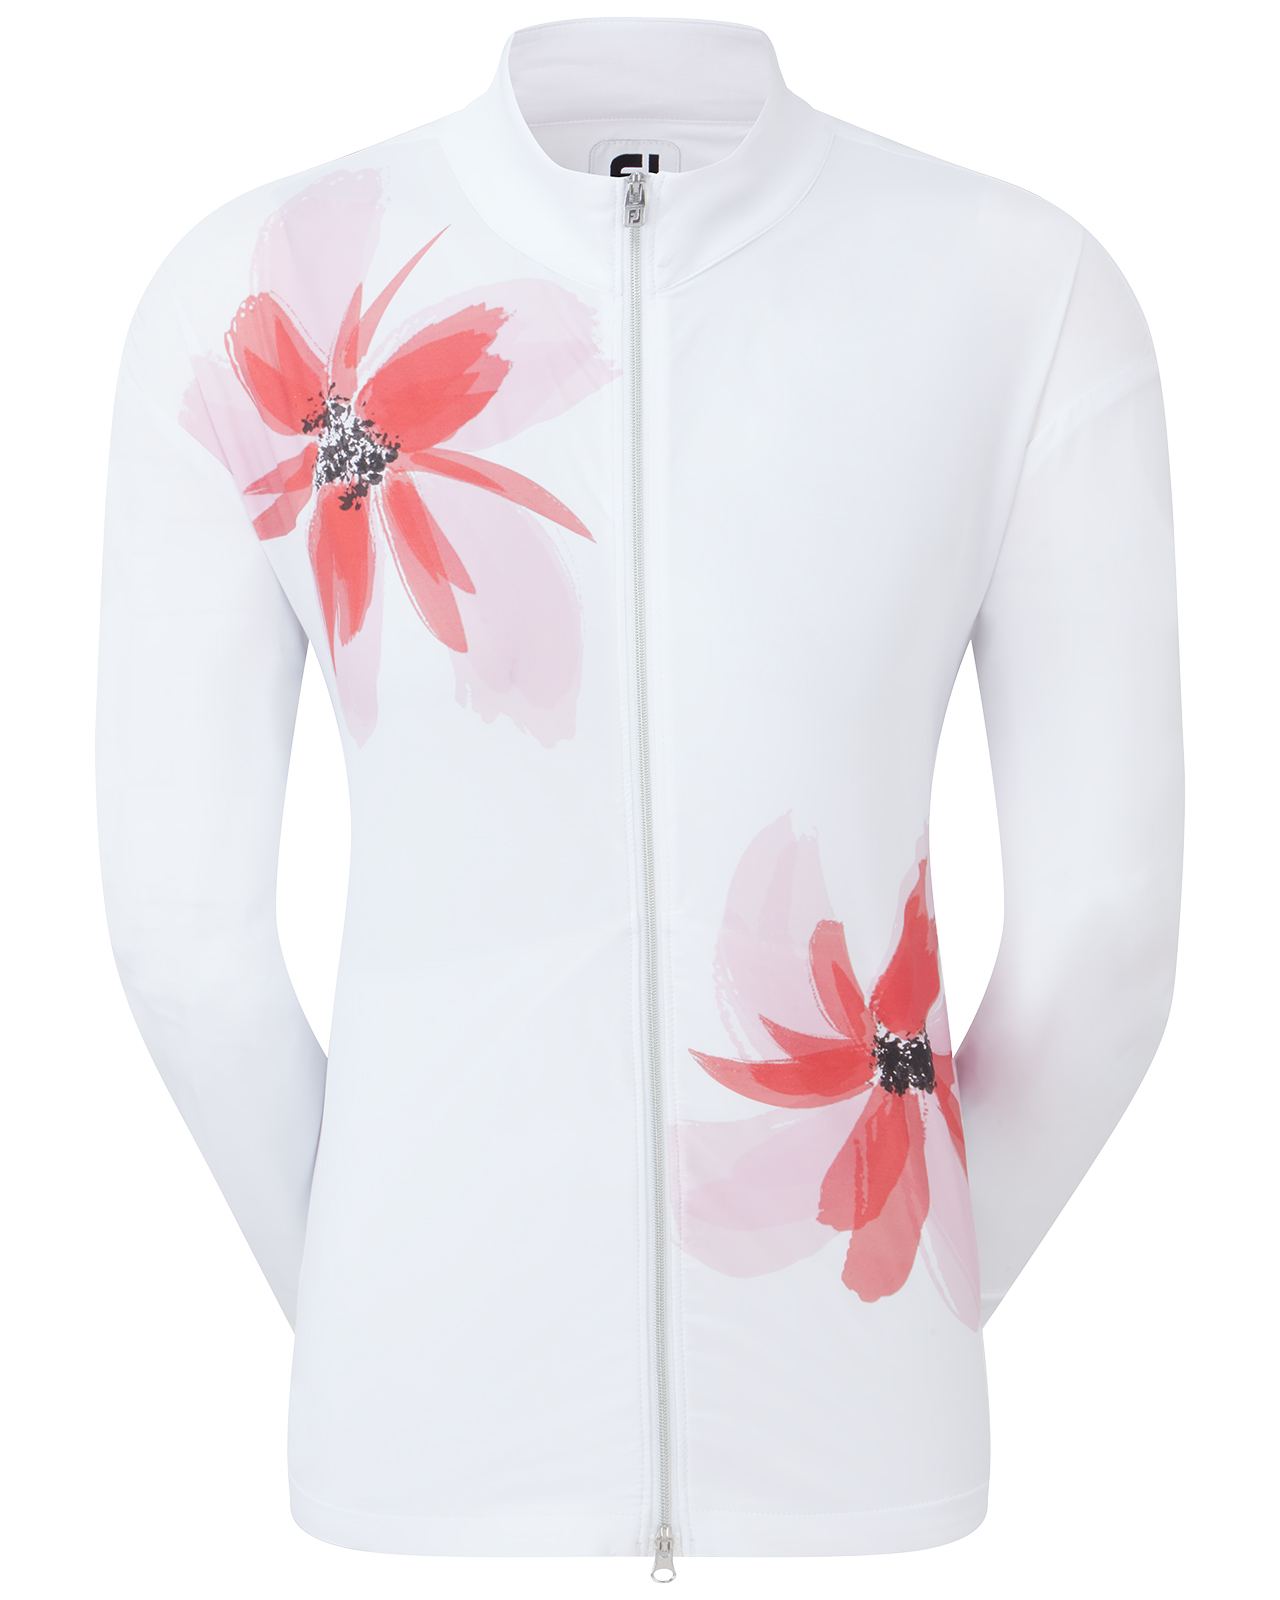 Lightweight Full-Zip, Genser, Dame - white_with_pink_red